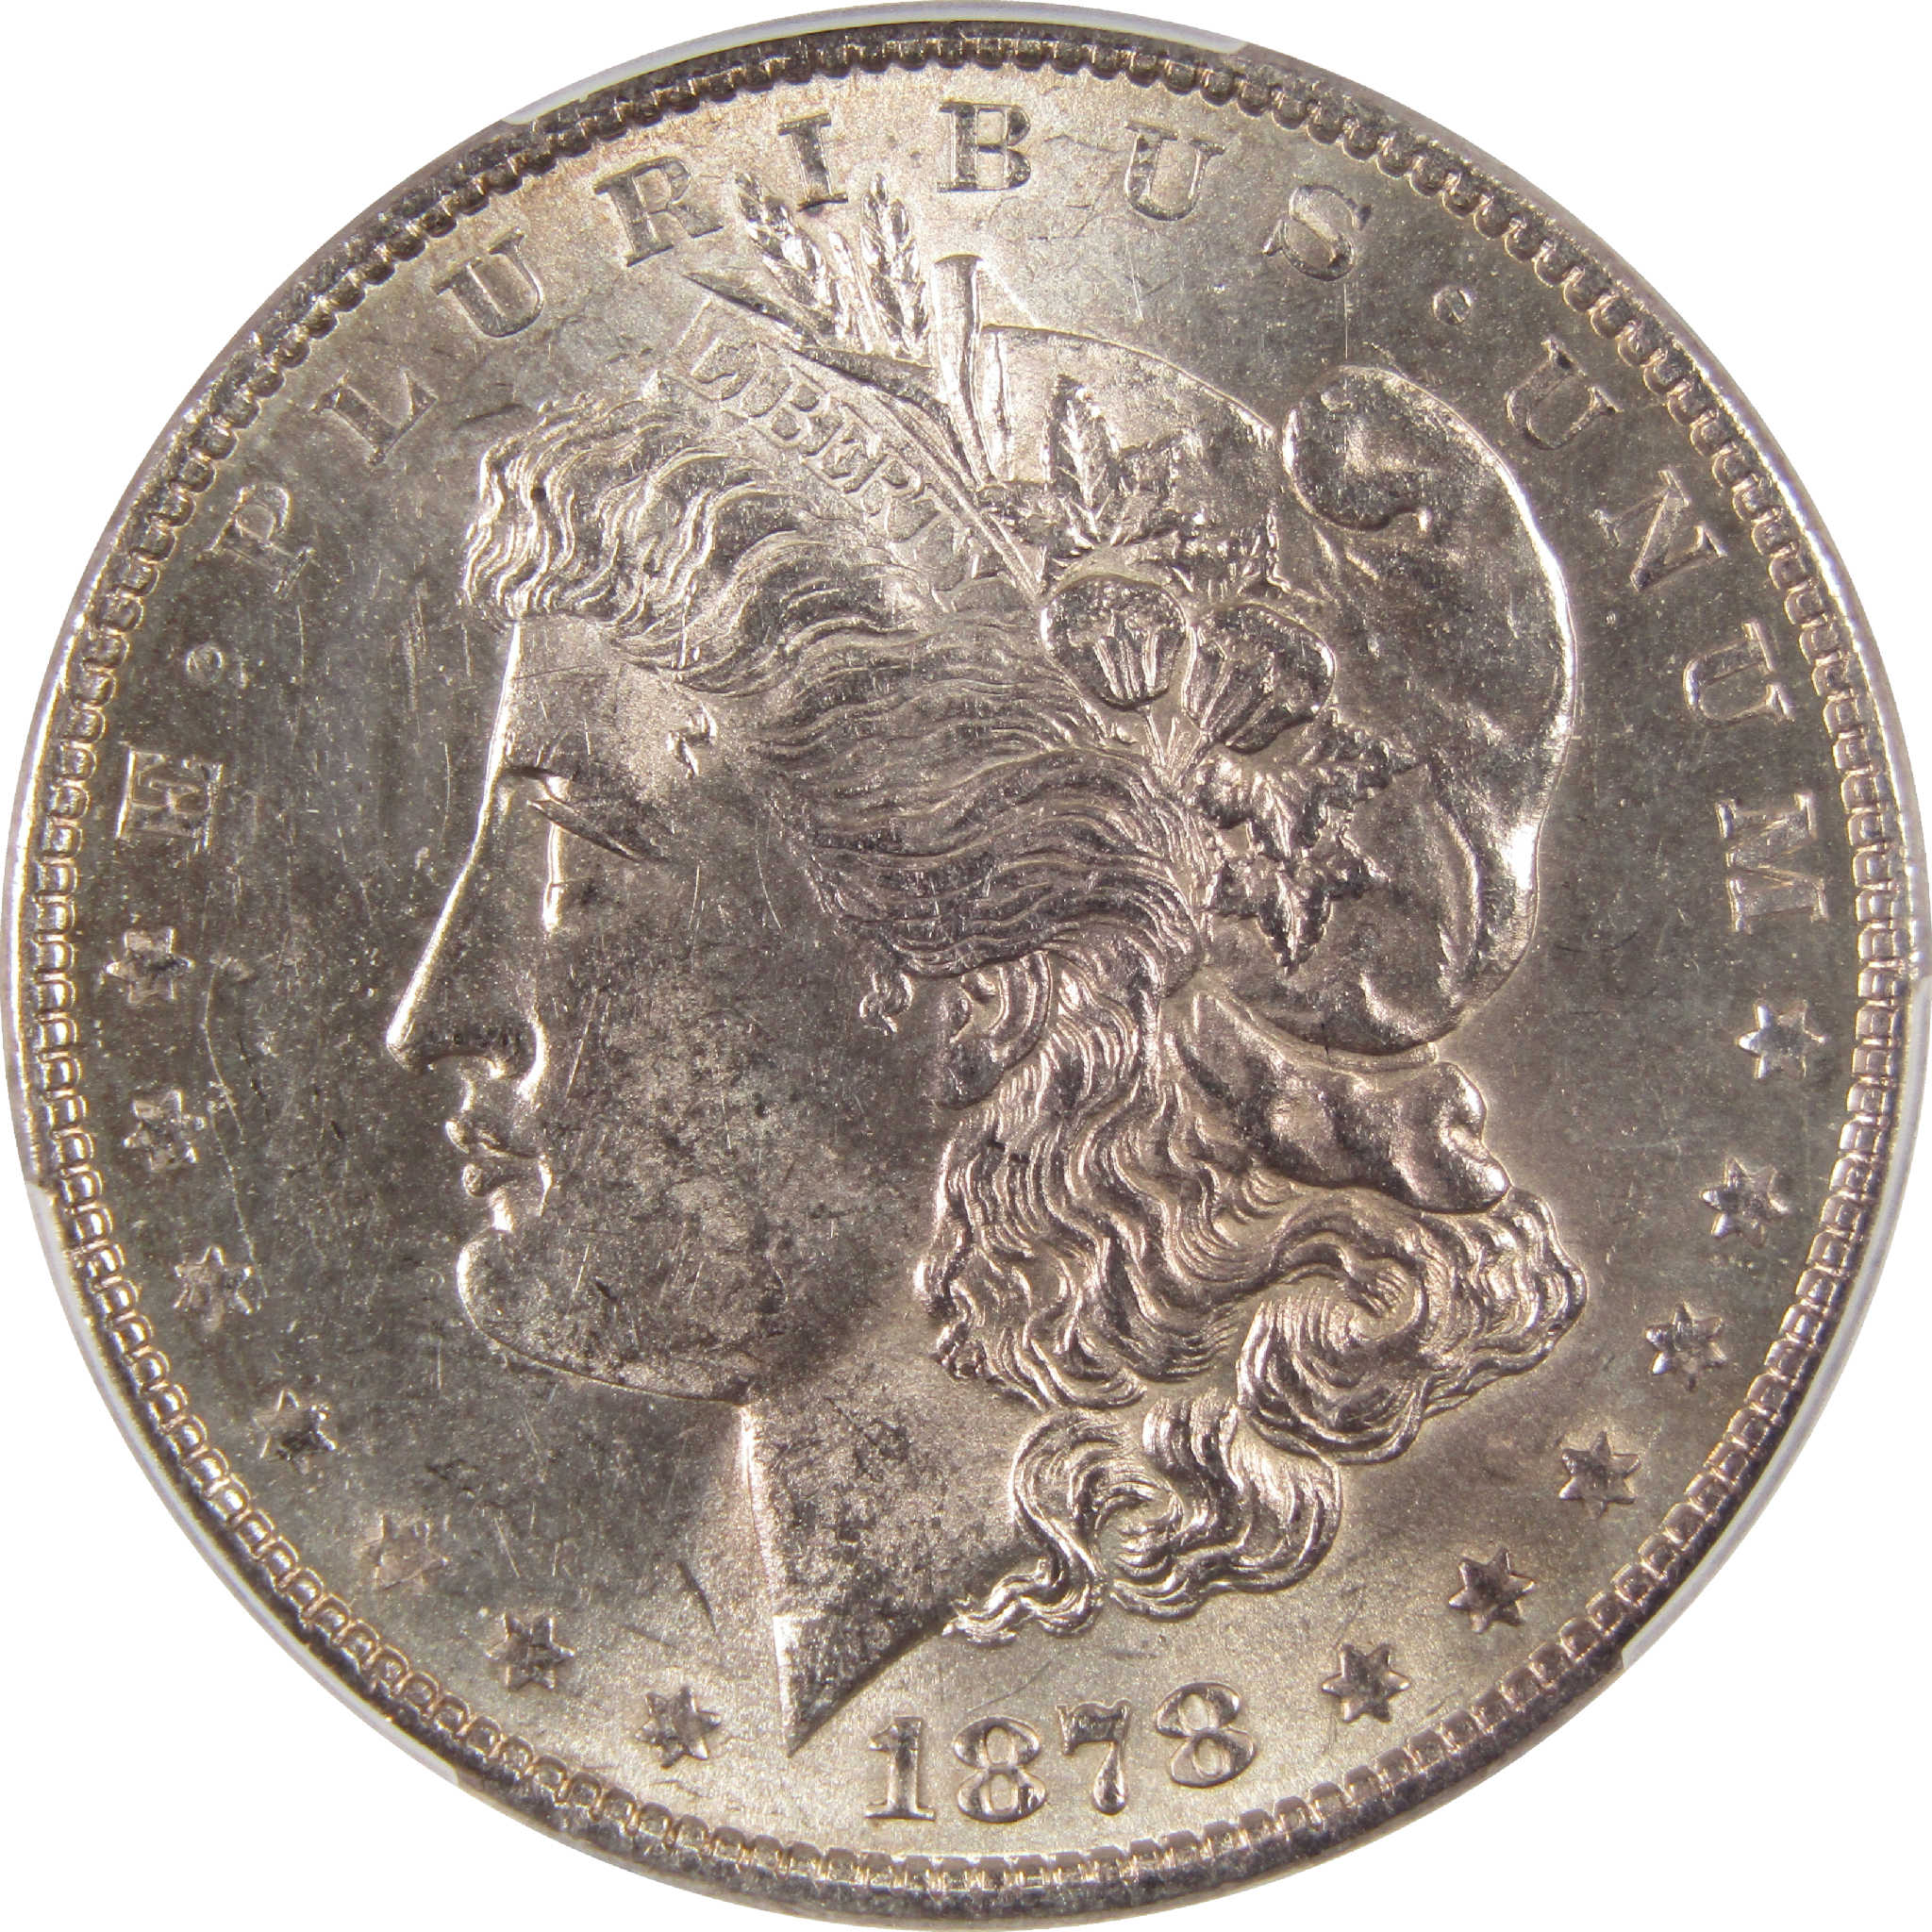 1878 7TF Rev 79 Morgan Dollar MS 62 PCGS Silver $1 Unc SKU:I11309 - Morgan coin - Morgan silver dollar - Morgan silver dollar for sale - Profile Coins &amp; Collectibles